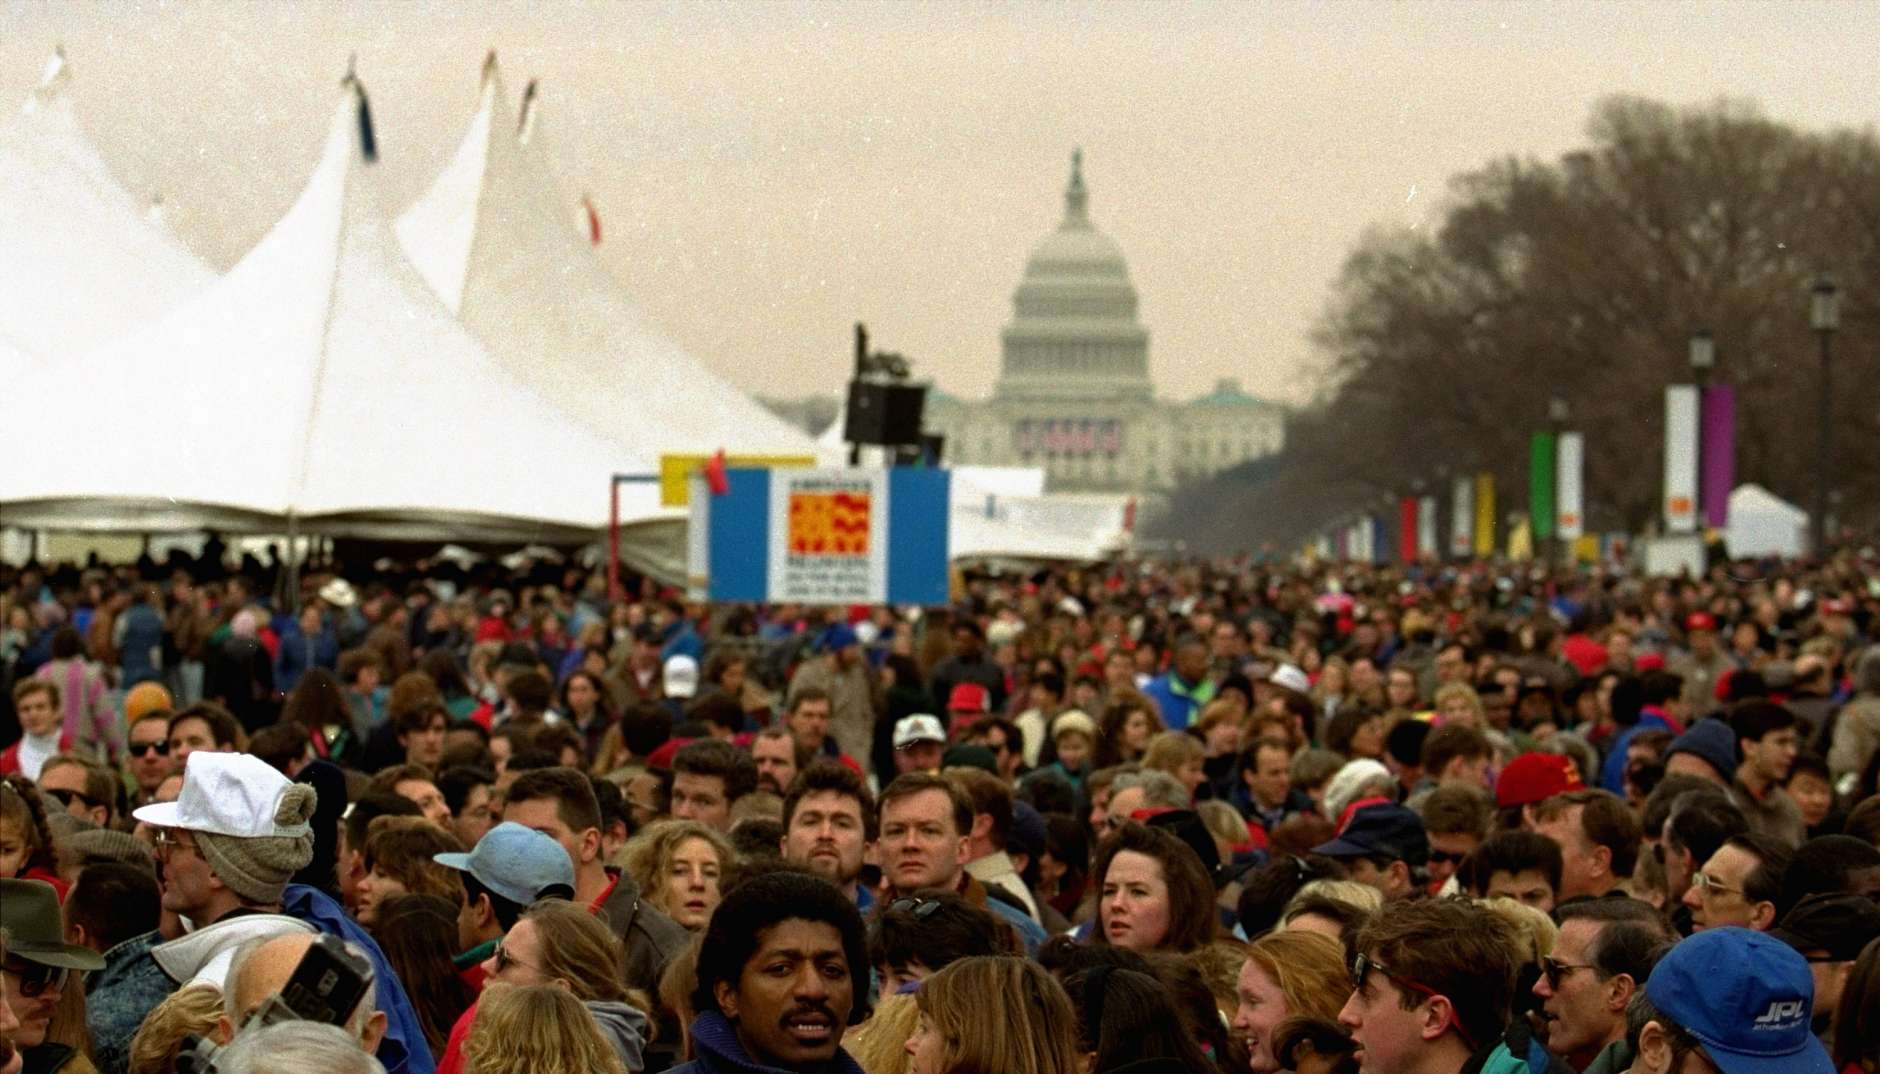 Thousands gather on the Mall Sunday to take in "America's Reunion on the Mall", a free festival of arts, crafts and music that opens Bill Clinton's five-day inaugural celebration.  The Capitol is in the background.  (AP Photo/Mark Wilson)